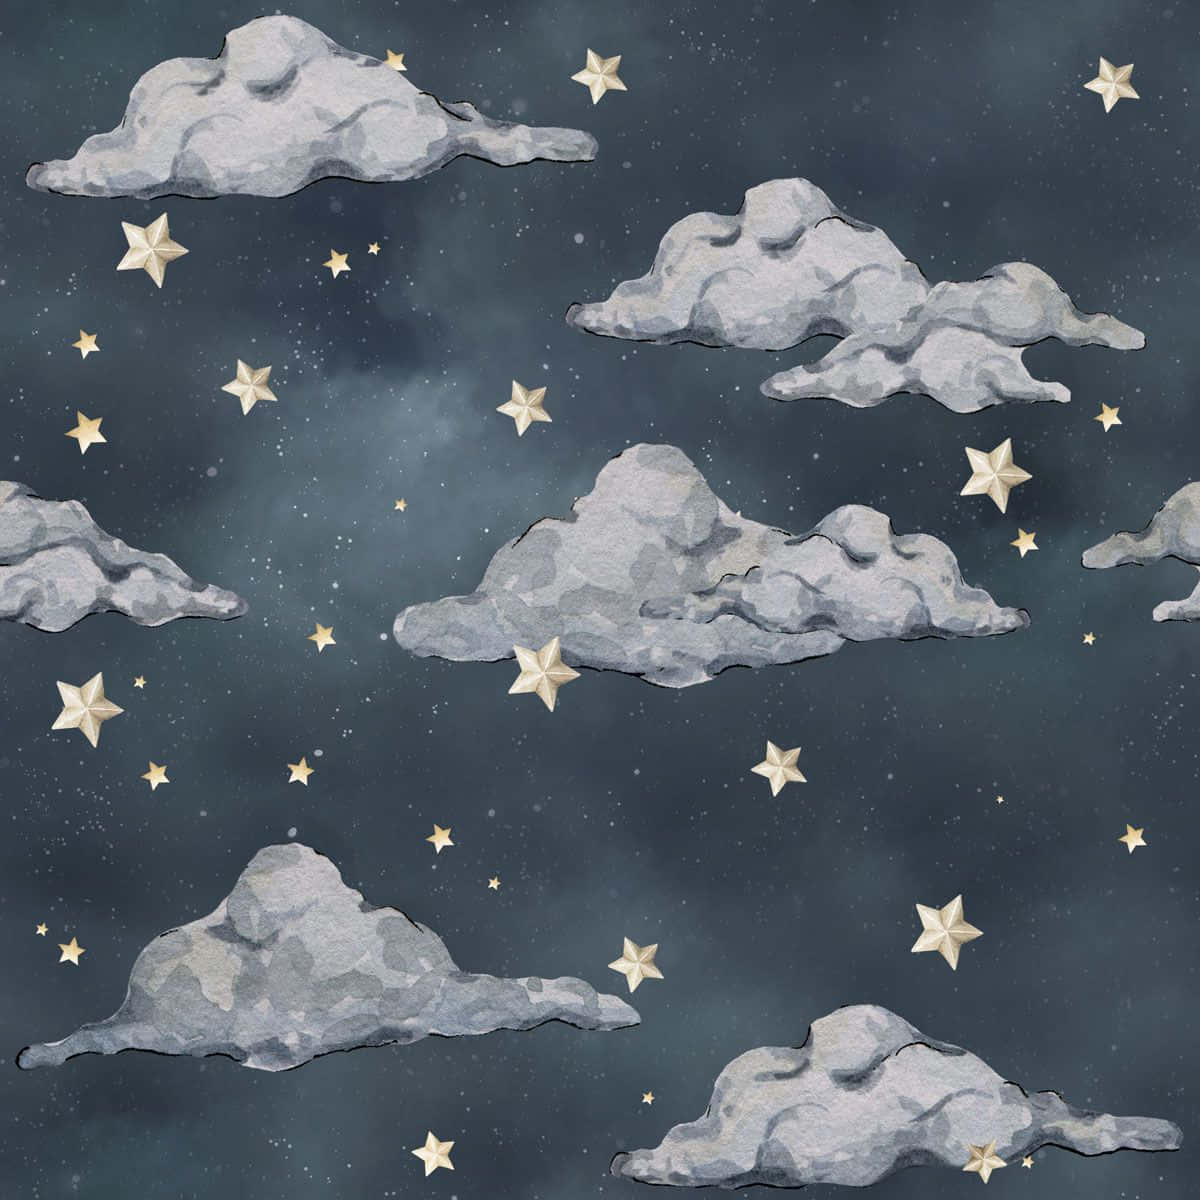 Magical Night Sky With Shining Stars And White Clouds Background